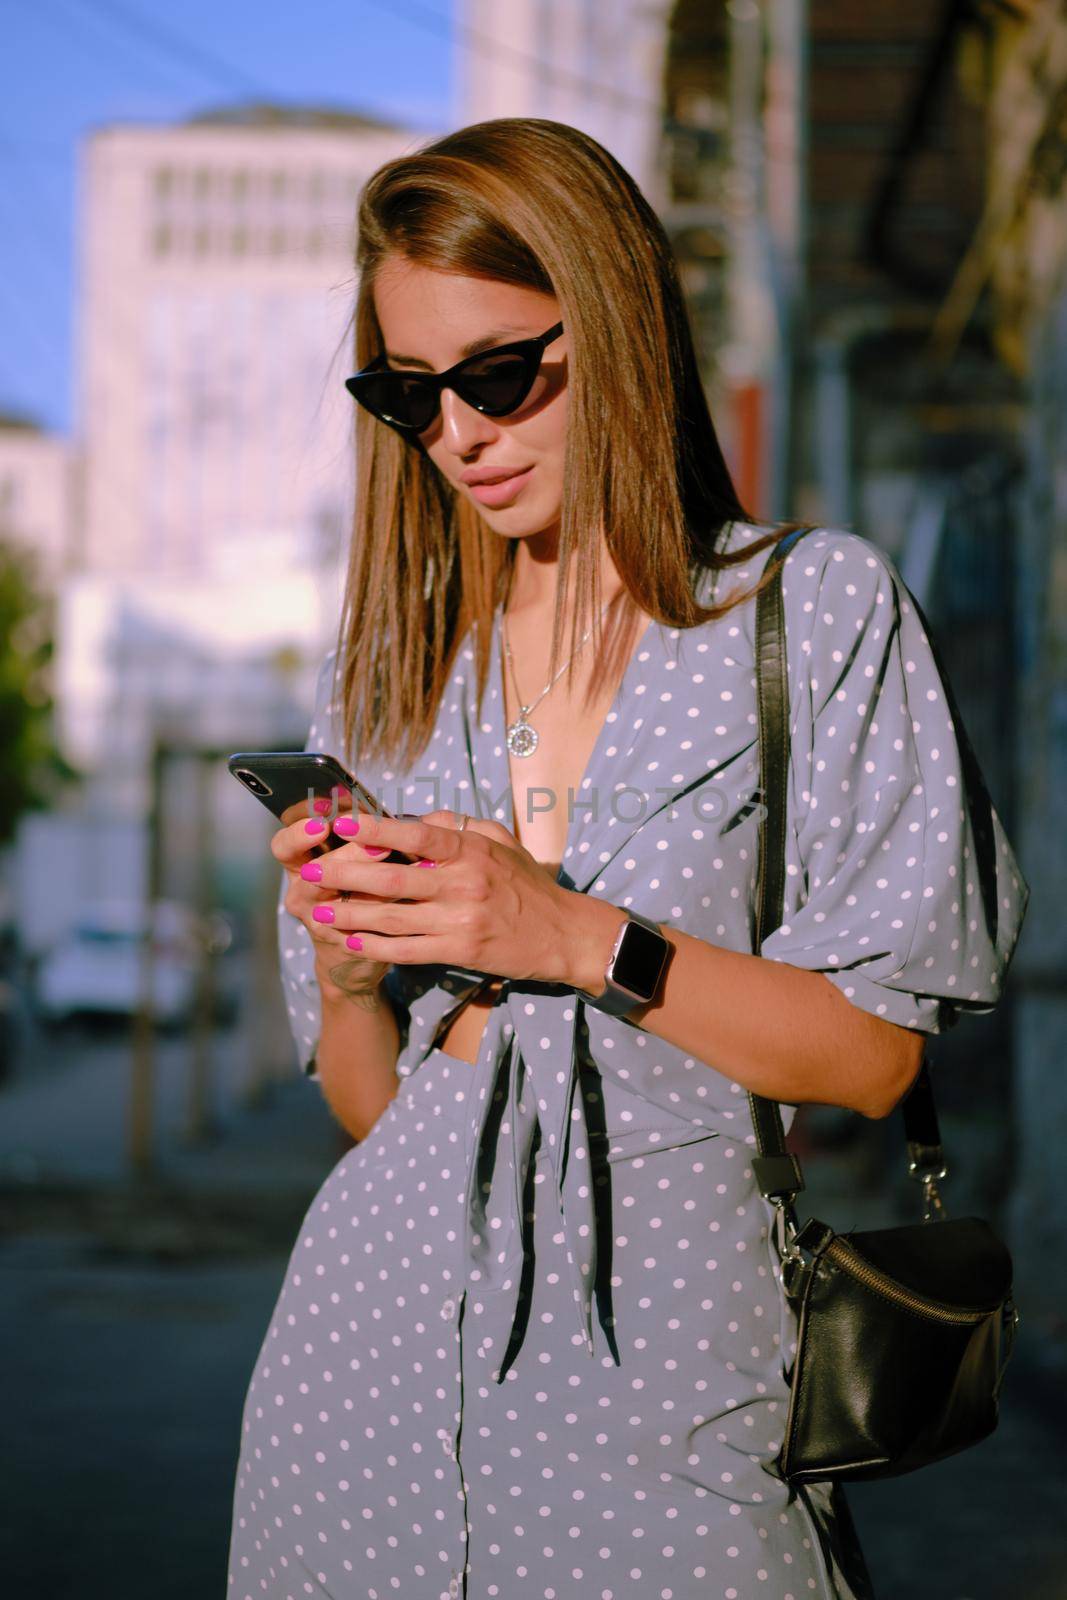 Graceful blonde maiden in a long blue dress with polka-dots, watch, sunglasses, with a pendant around her neck and a small black handbag on her shoulder is using her smartphone while walking alone in the city. The concept of fashion and style. Close-up shot.